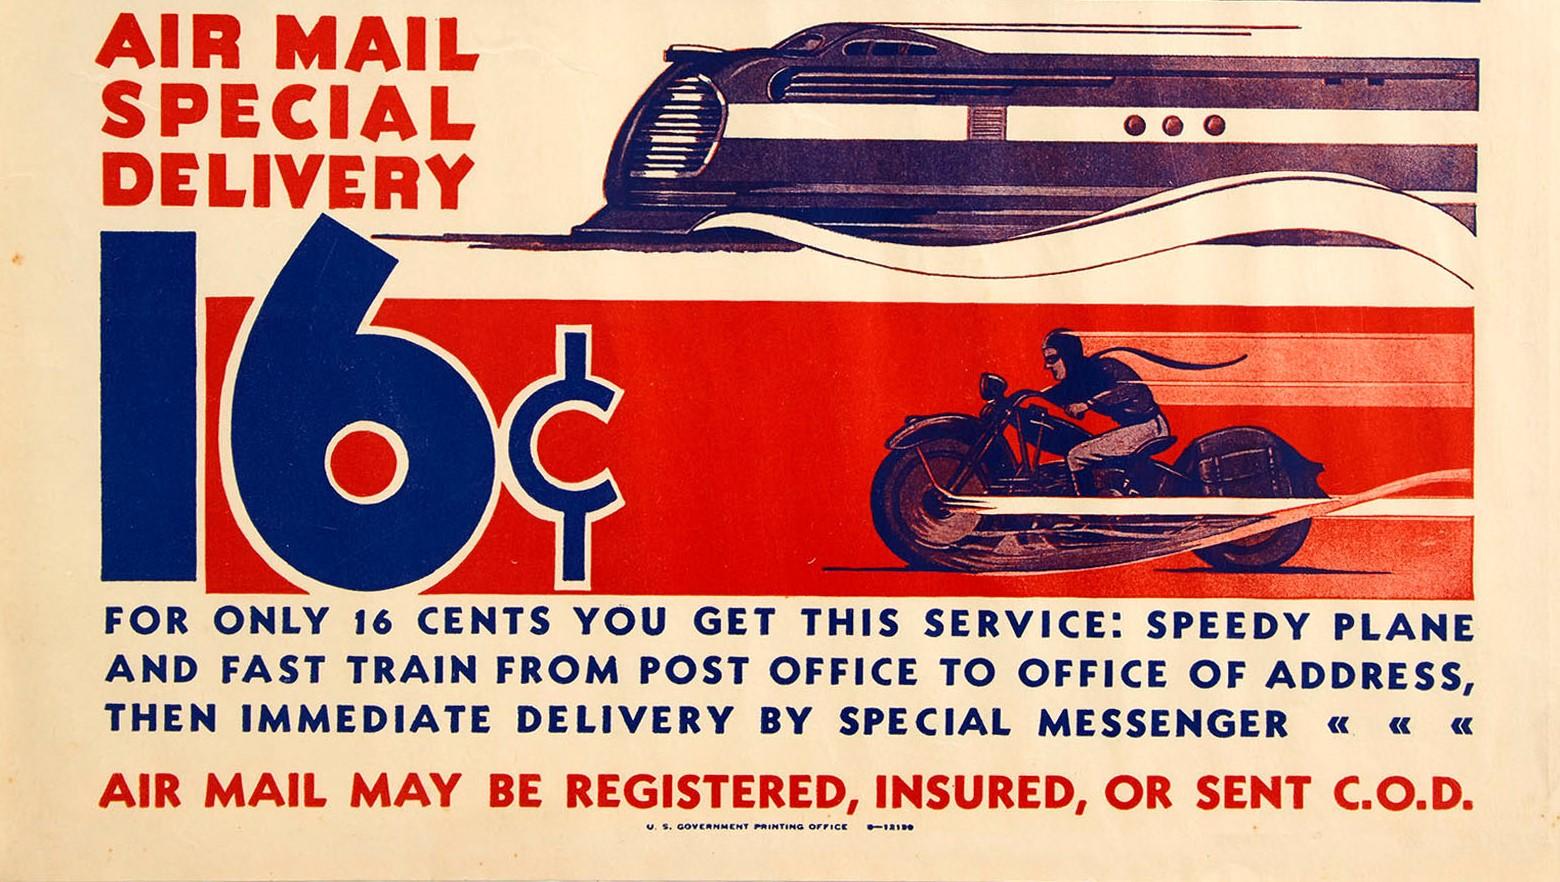 Original vintage advertising poster for Air Mail Special Delivery 